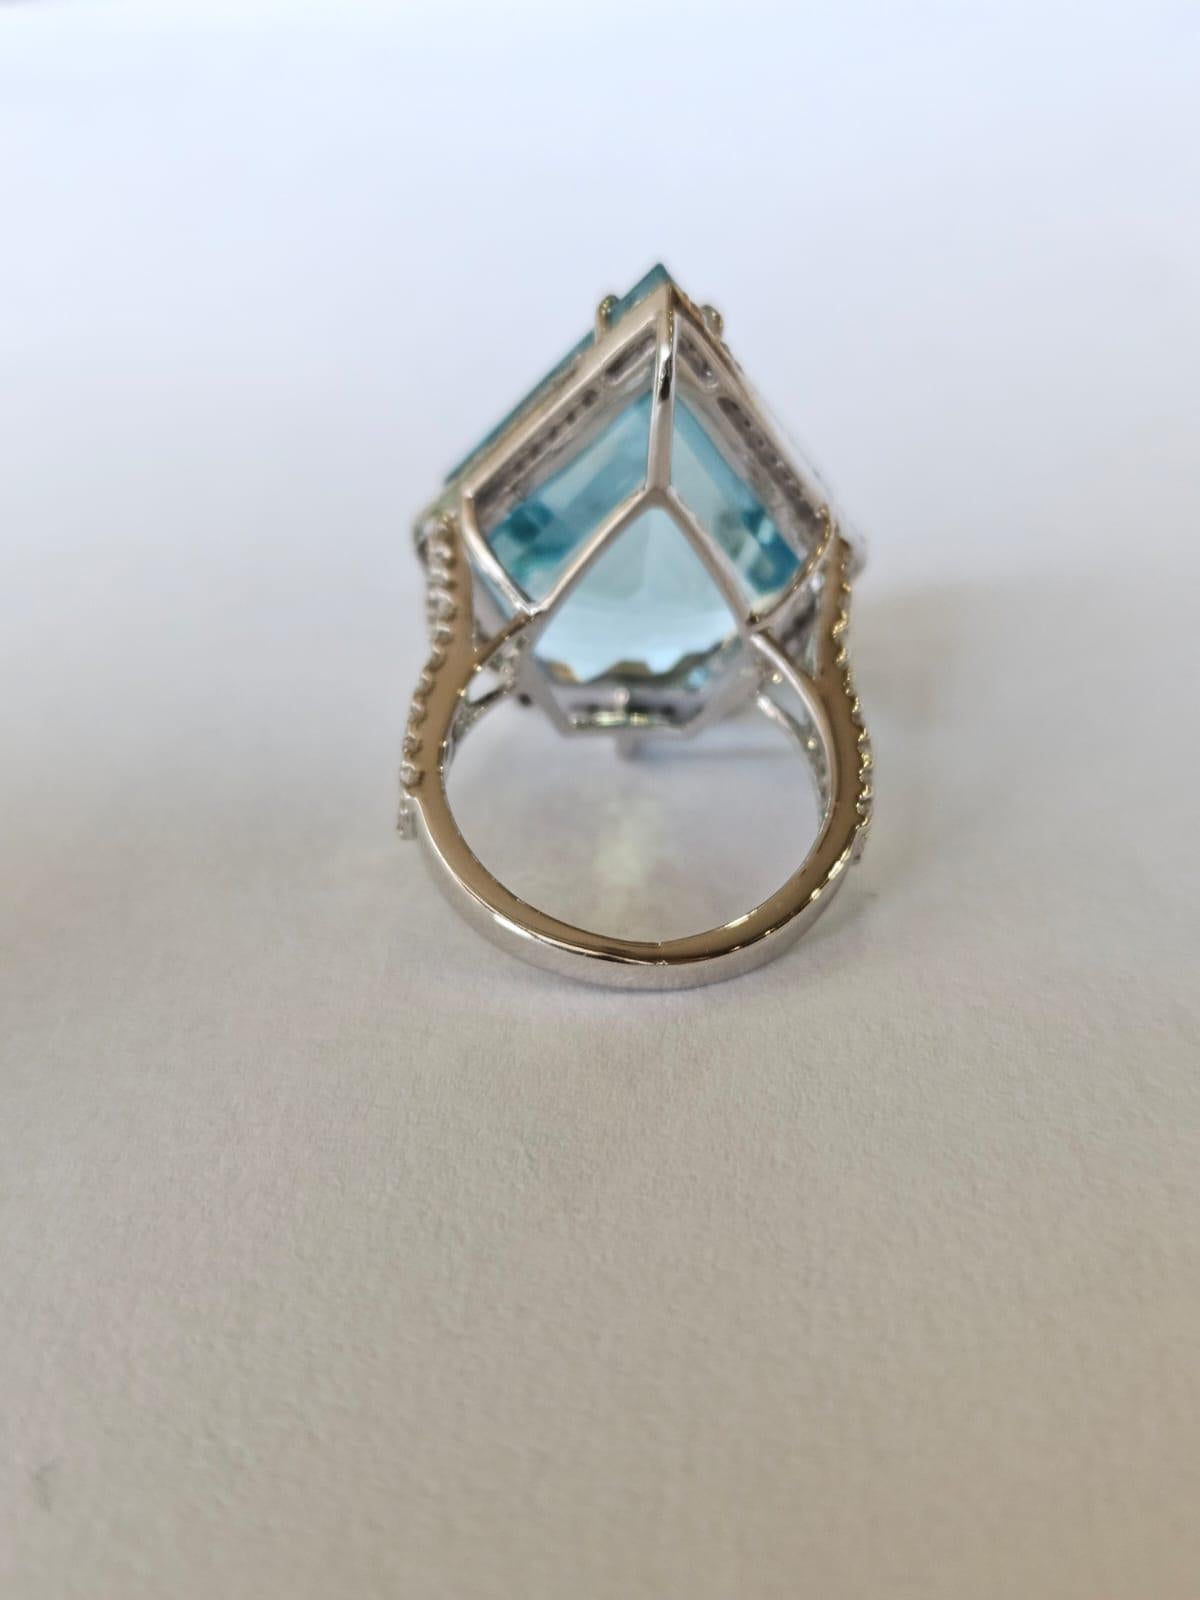 Modern Set in 18K White Gold, 26.81 carats, Aquamarine & Diamonds Cocktail Ring For Sale